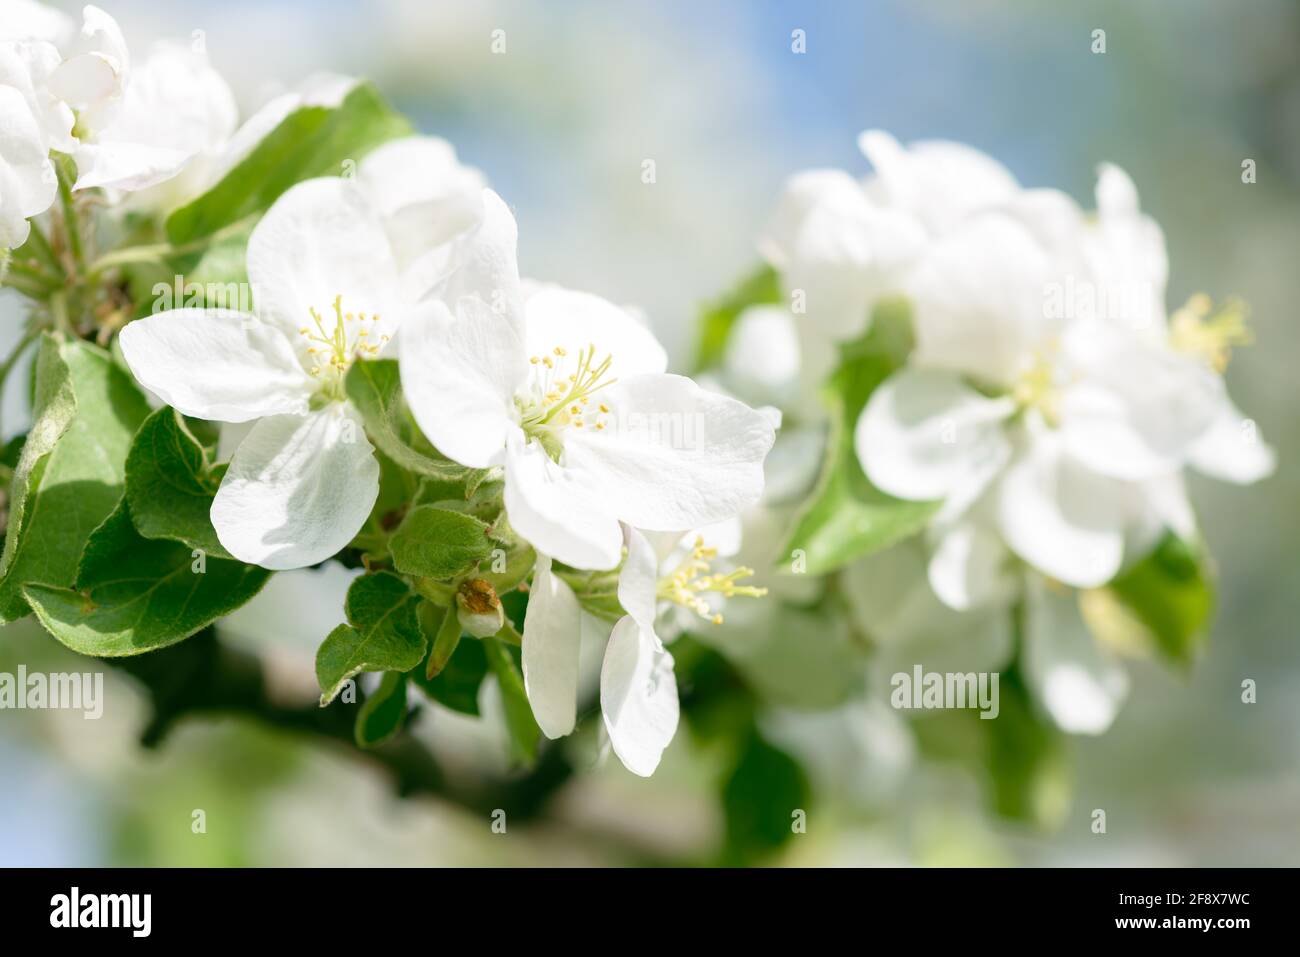 https://c8.alamy.com/comp/2F8X7WC/beautiful-flowering-cherry-plum-pear-or-apple-trees-background-with-blooming-flowers-in-spring-day-a-fragrant-spring-garden-2F8X7WC.jpg